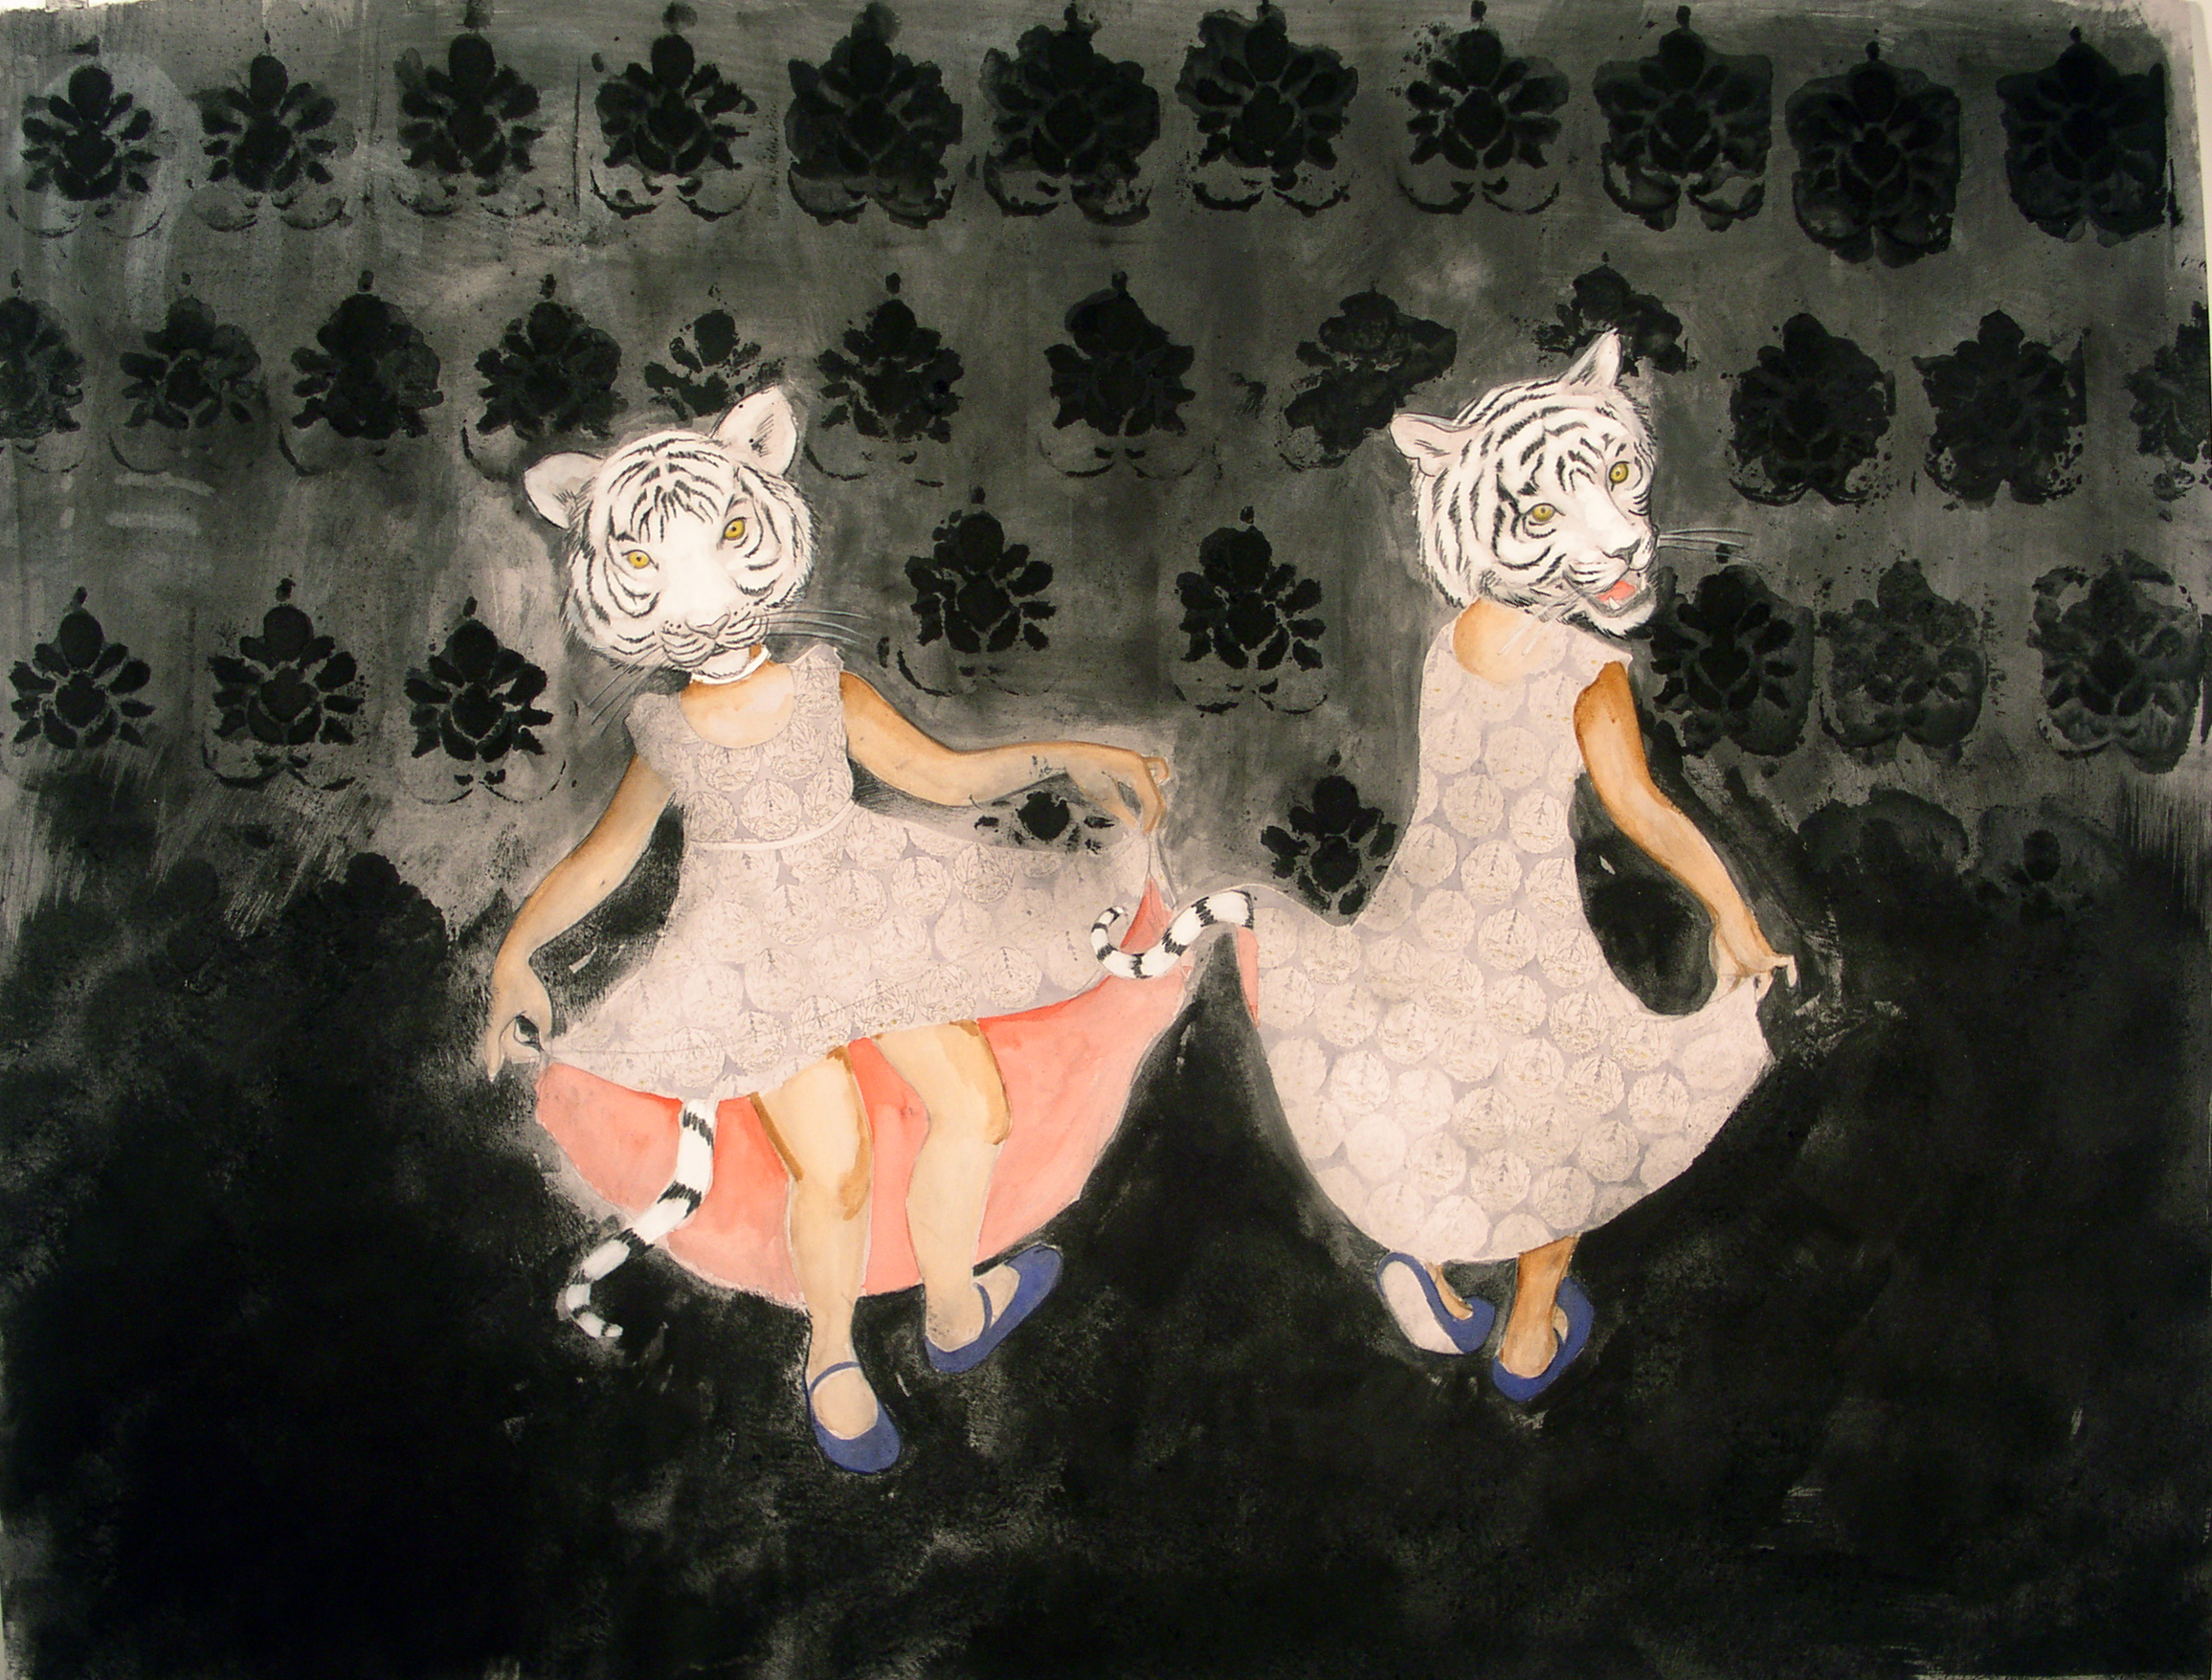   Tiger Girls&nbsp; , 2005 Charcoal, glue, graphite, ink and watercolor on gray paper 38 X 50 inches Private collection&nbsp; 